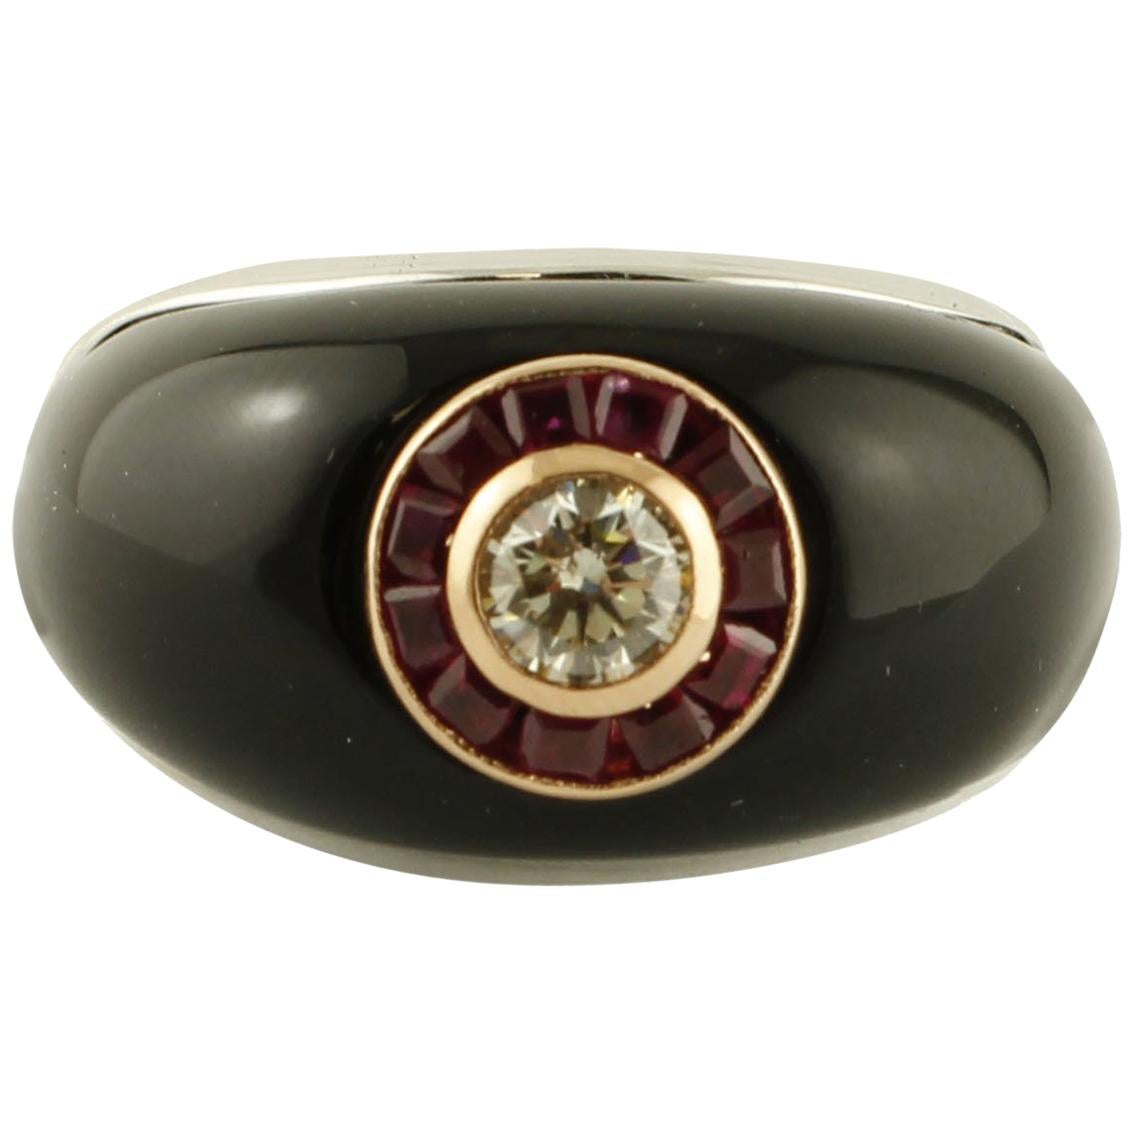 Central Diamond, Rubies, Onyx, 18 Karat White and Rose Gold Ring